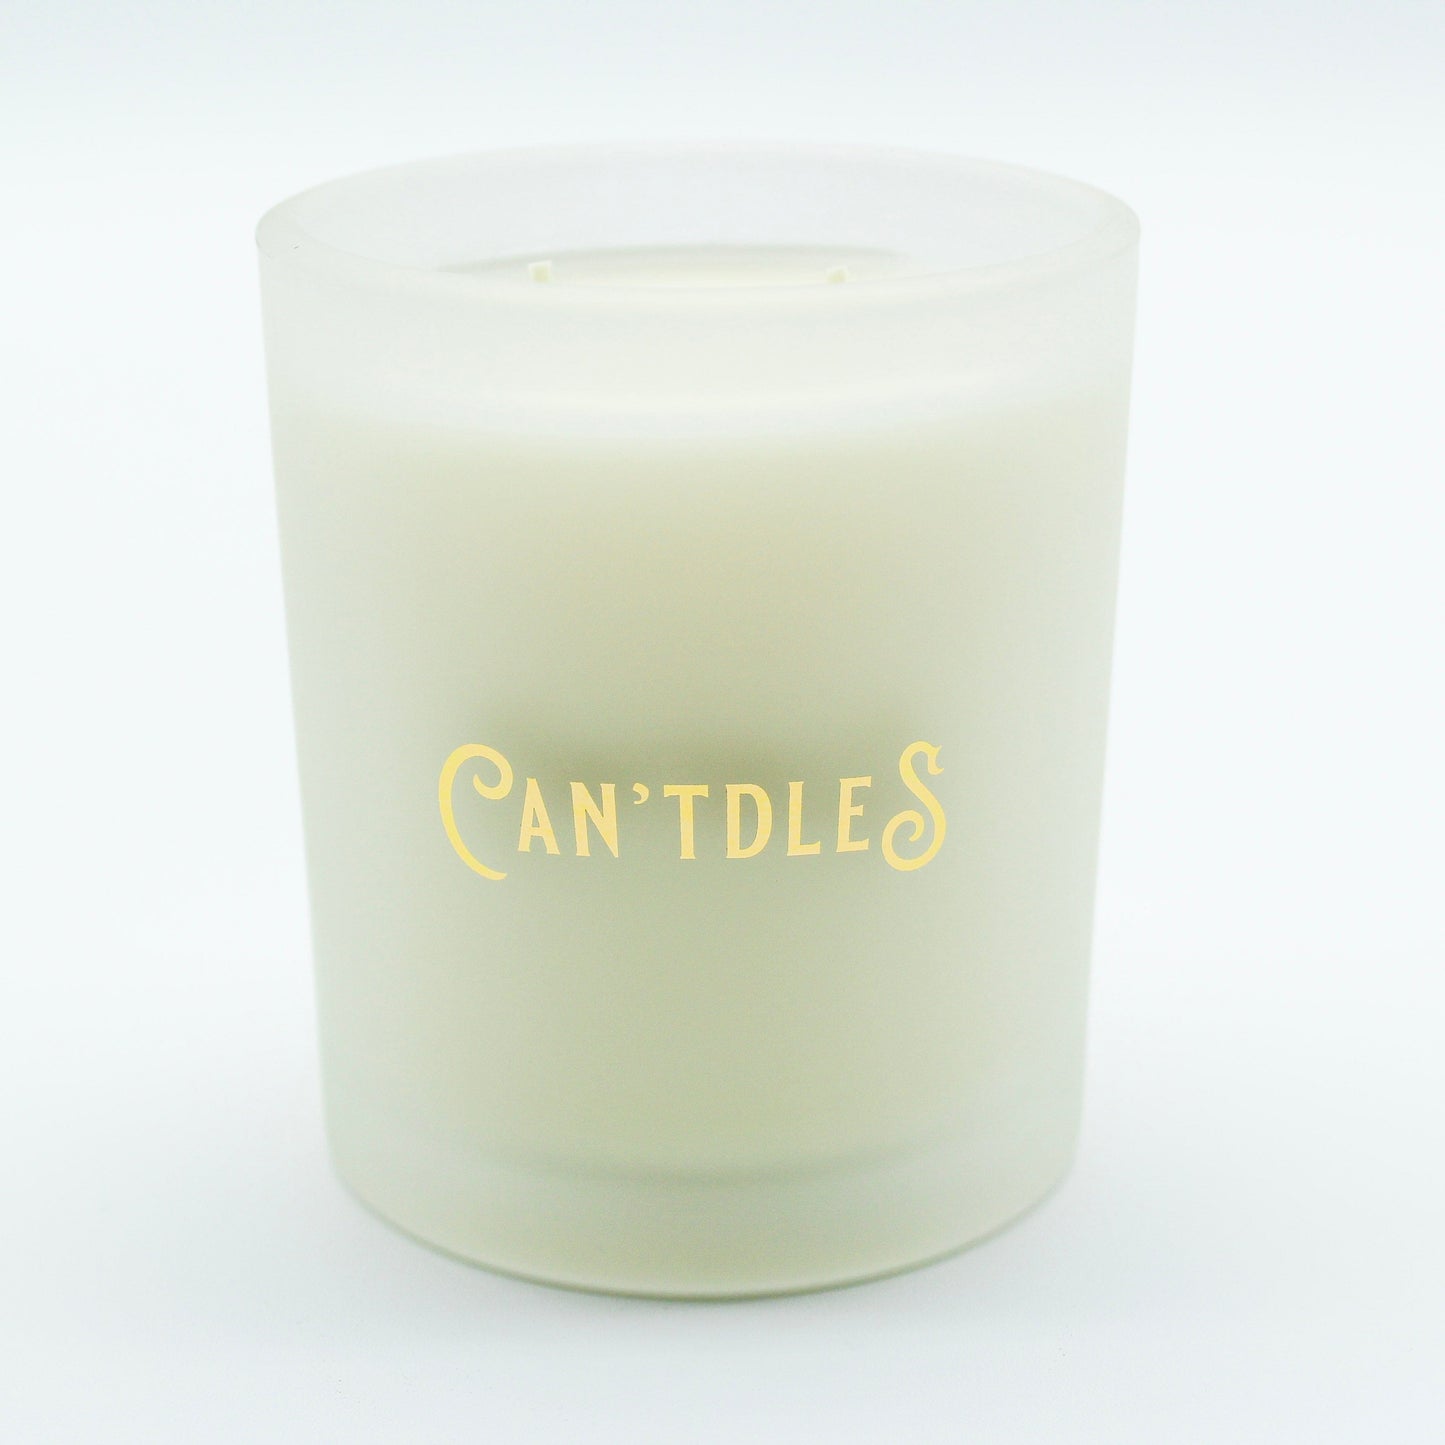 Can'tdles Candles Cotton-Headed Ninny Muggins: Crushed Candy Cane Holiday Candle